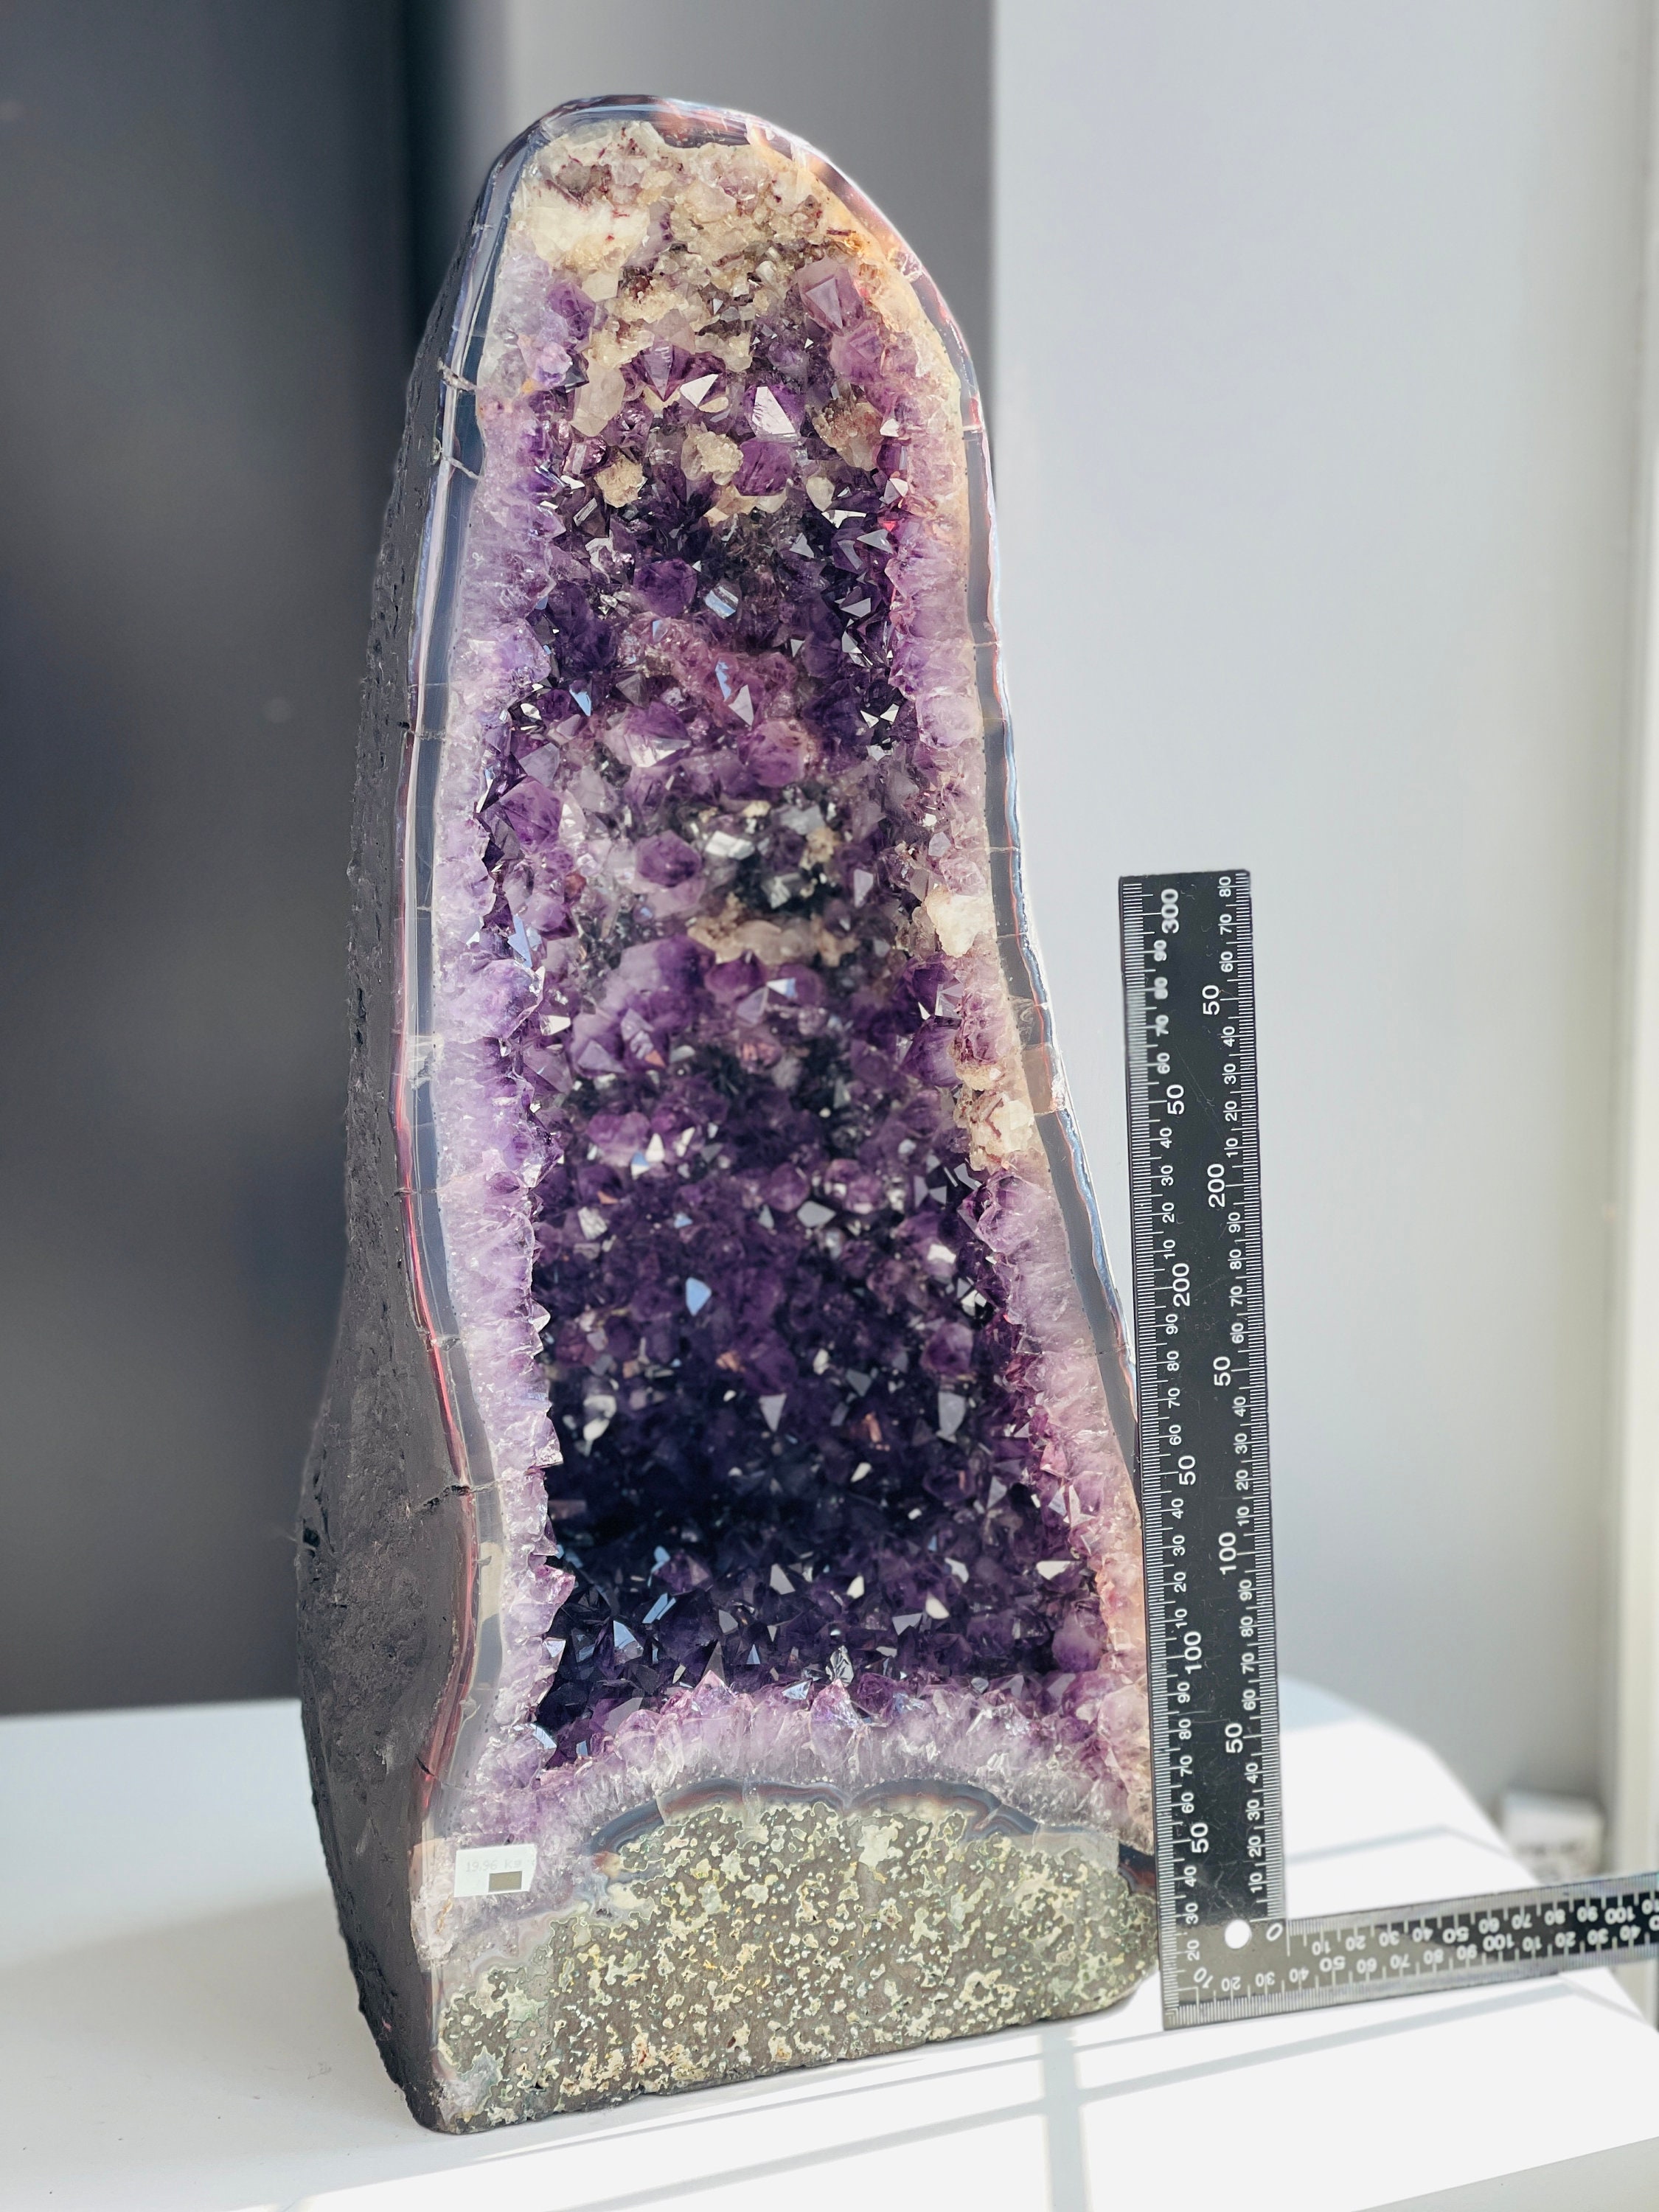 EMOTIONAL HEALING POOL Amethyst Geode Cathedral 19.50 VERY High